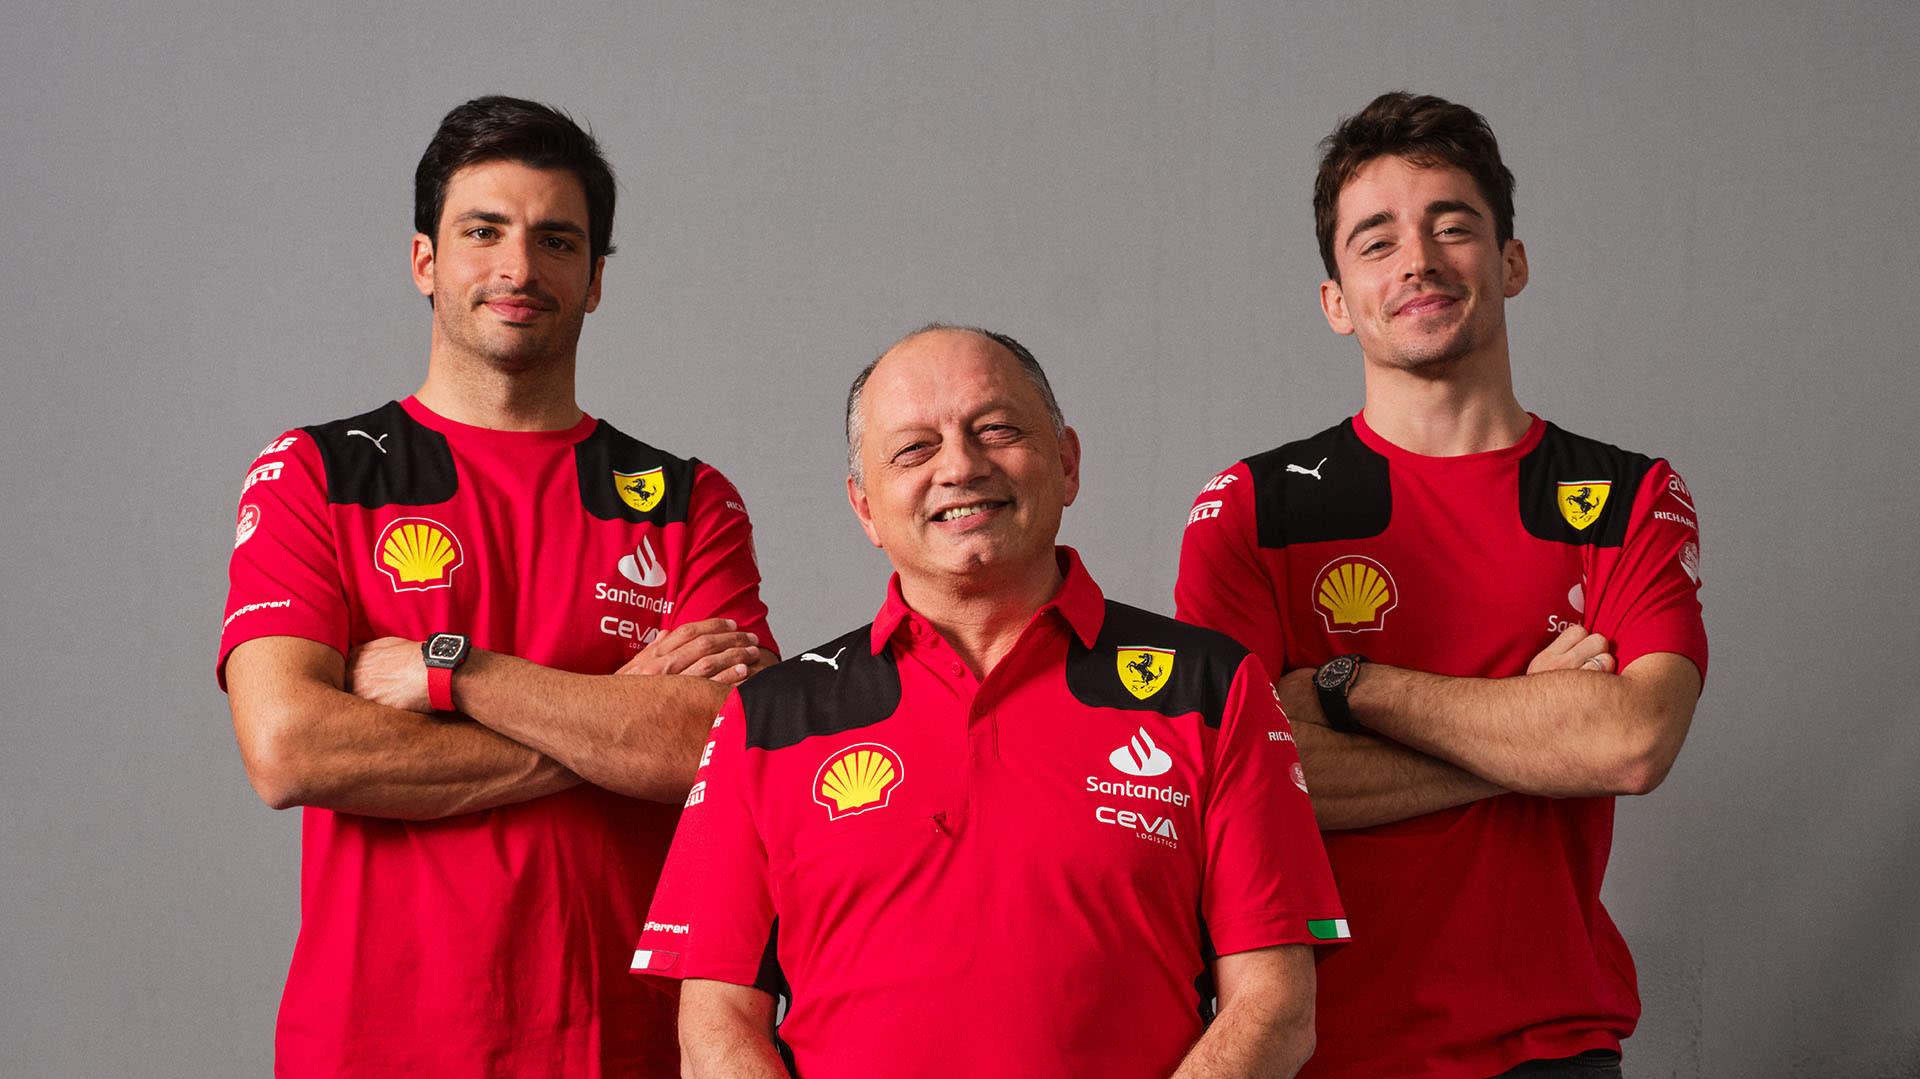 Ferrari Have To Deliver In Says Vasseur As He Reflects On